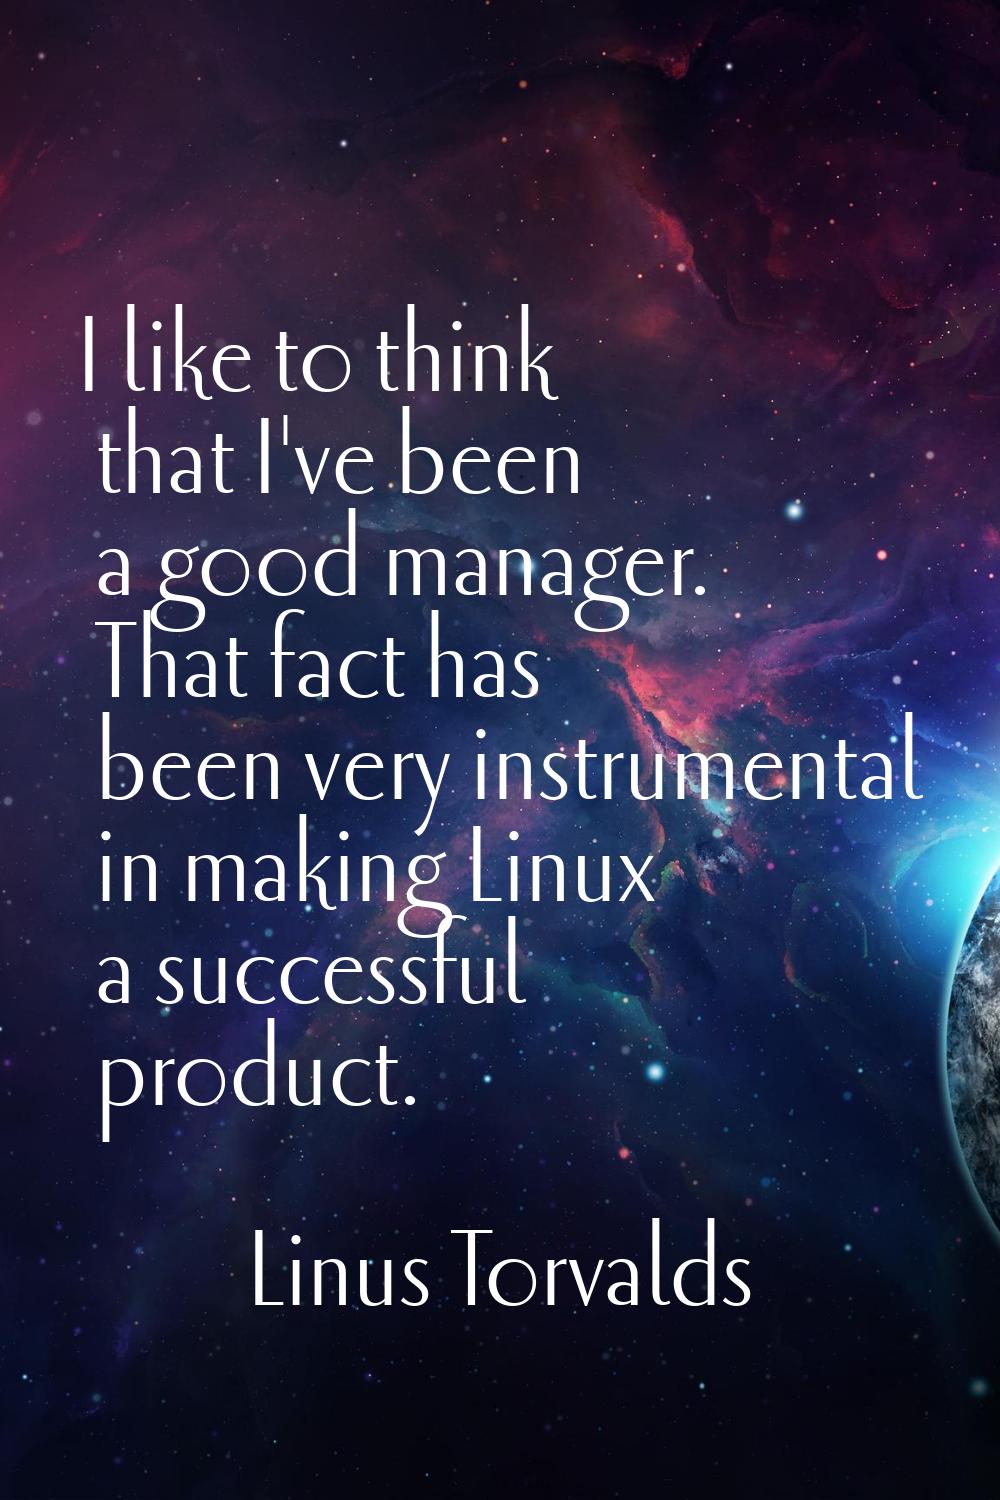 I like to think that I've been a good manager. That fact has been very instrumental in making Linux